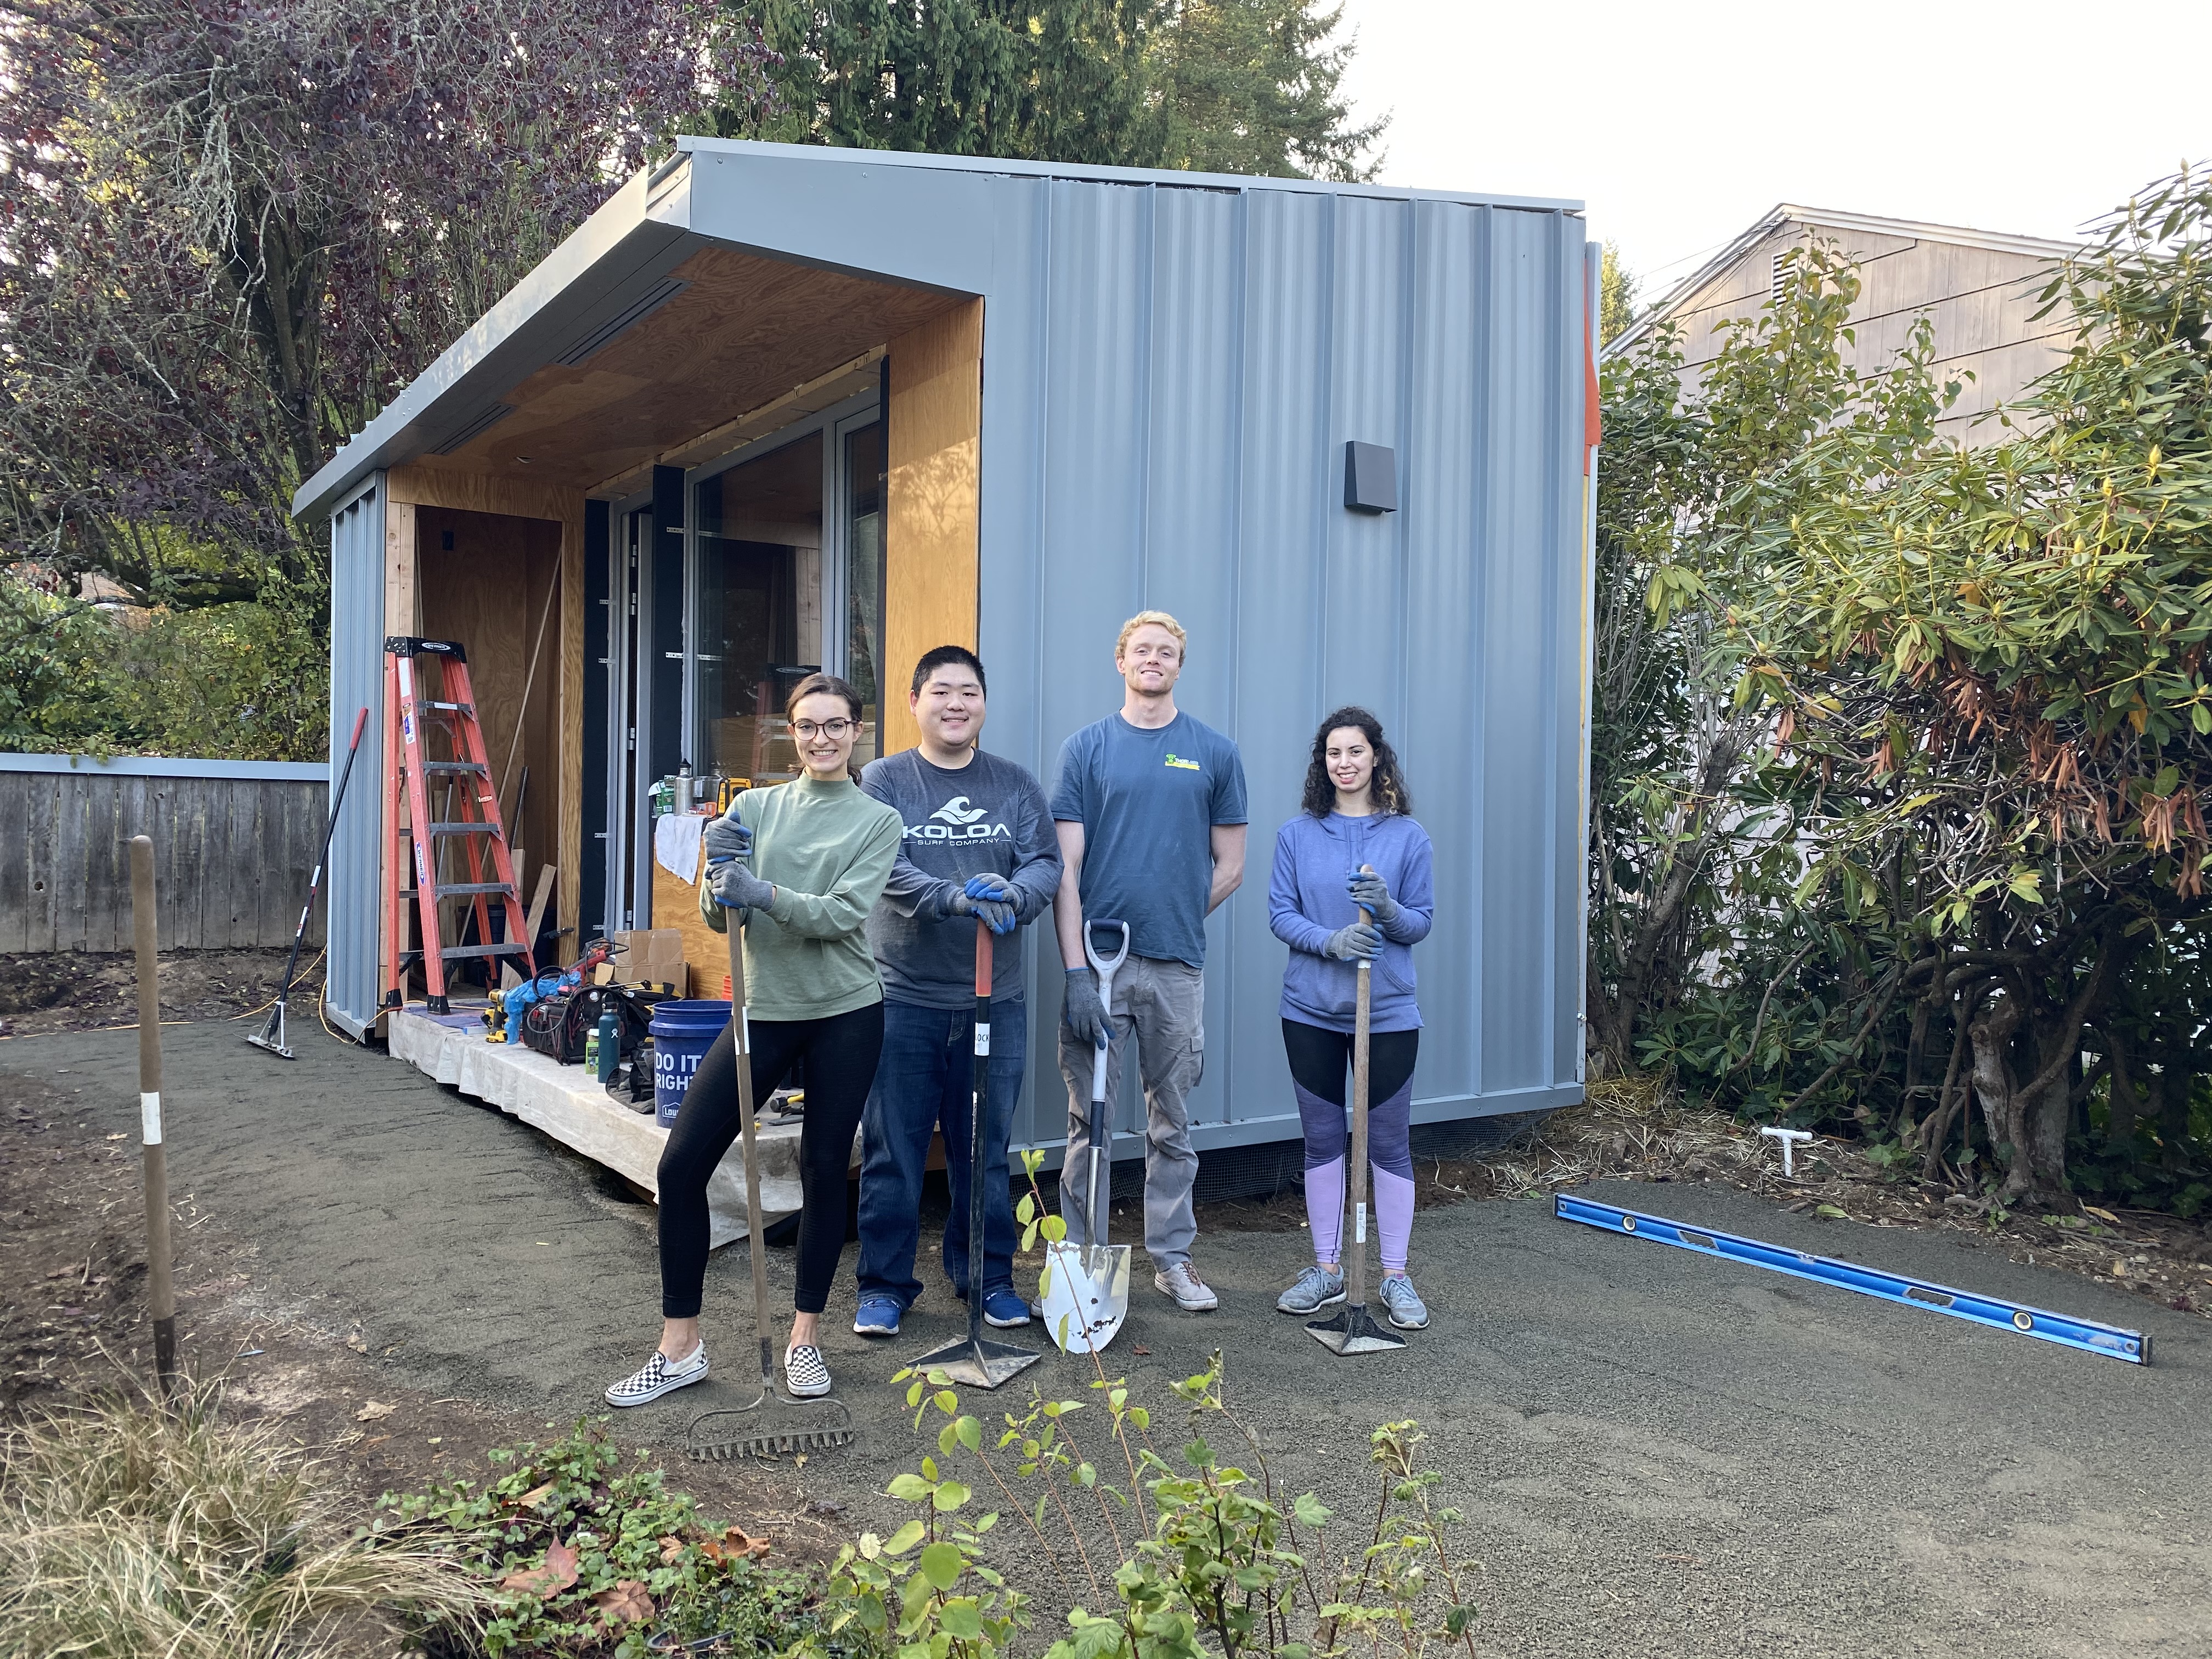 4 SU students post in front of a blue tinyhouse that they helped build in a backyard